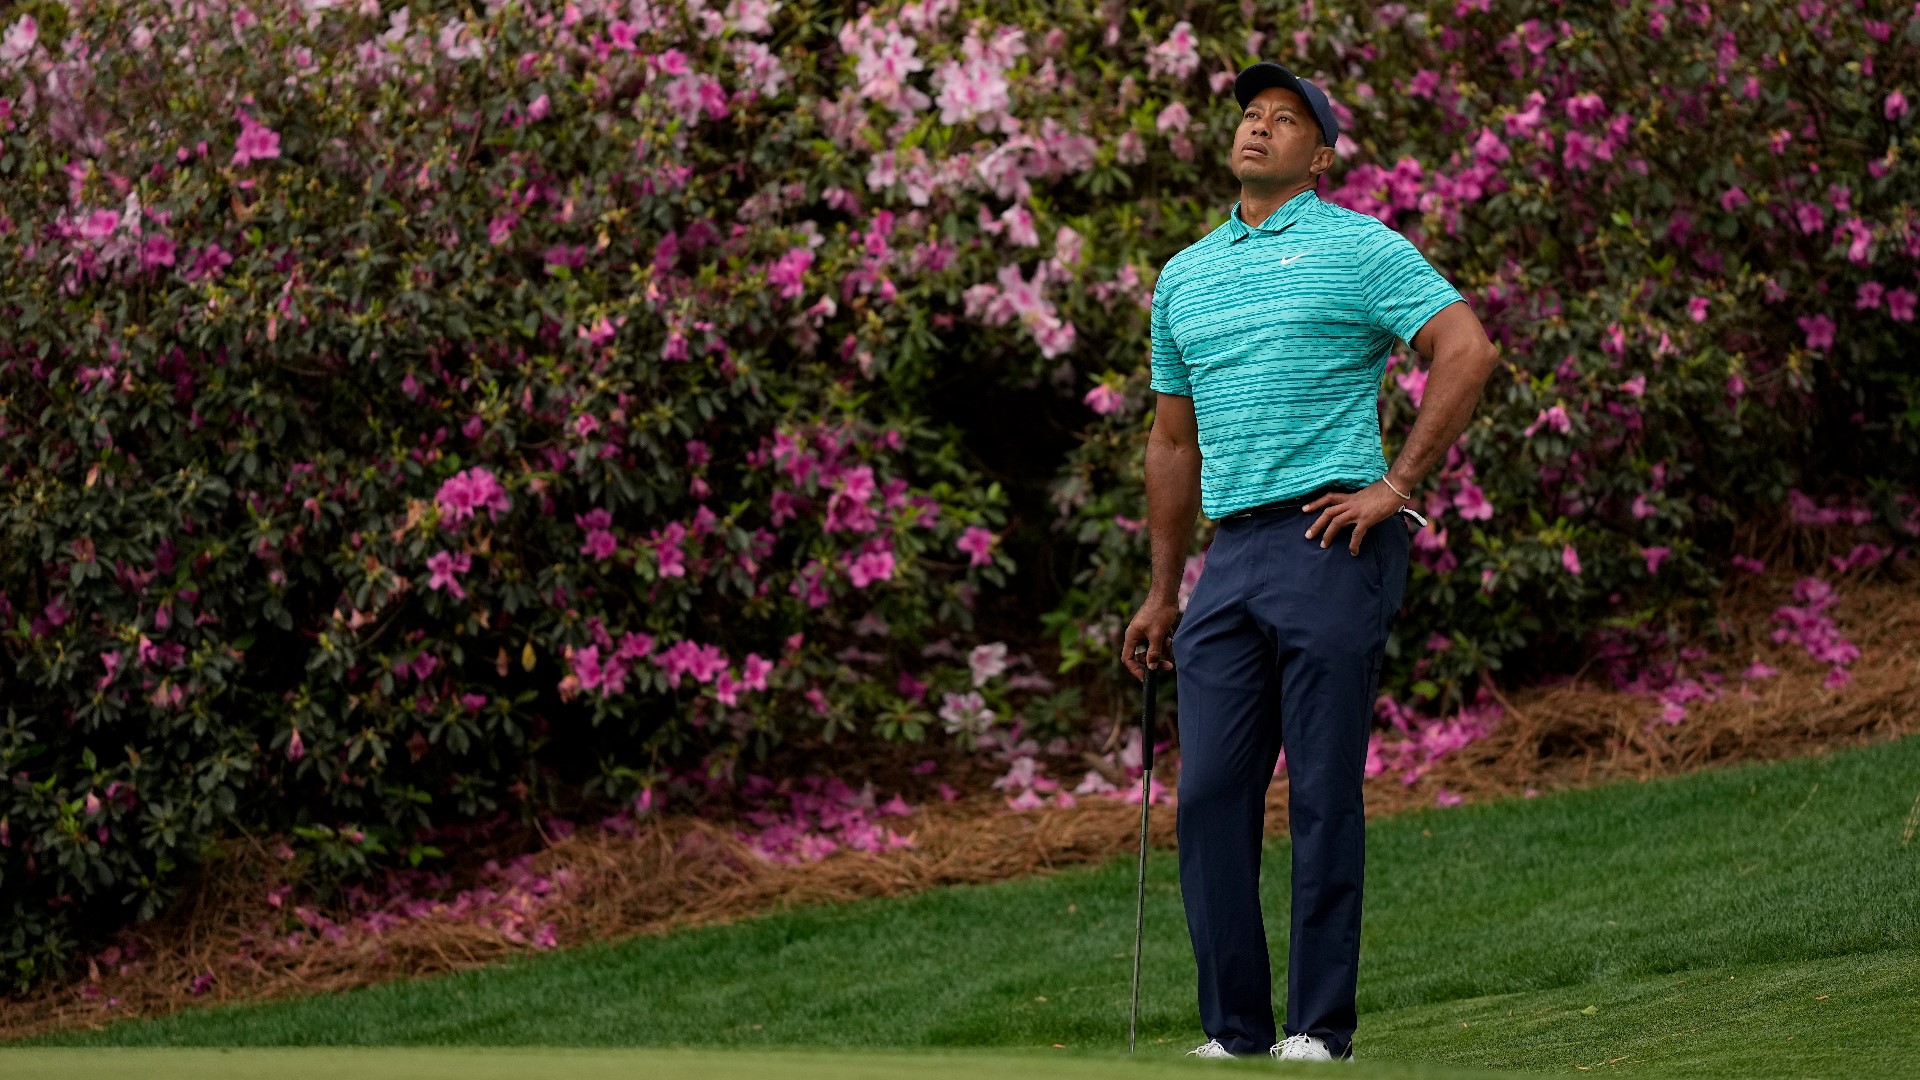 Tiger woods announced on social media his long running partnership with Nike has ended.